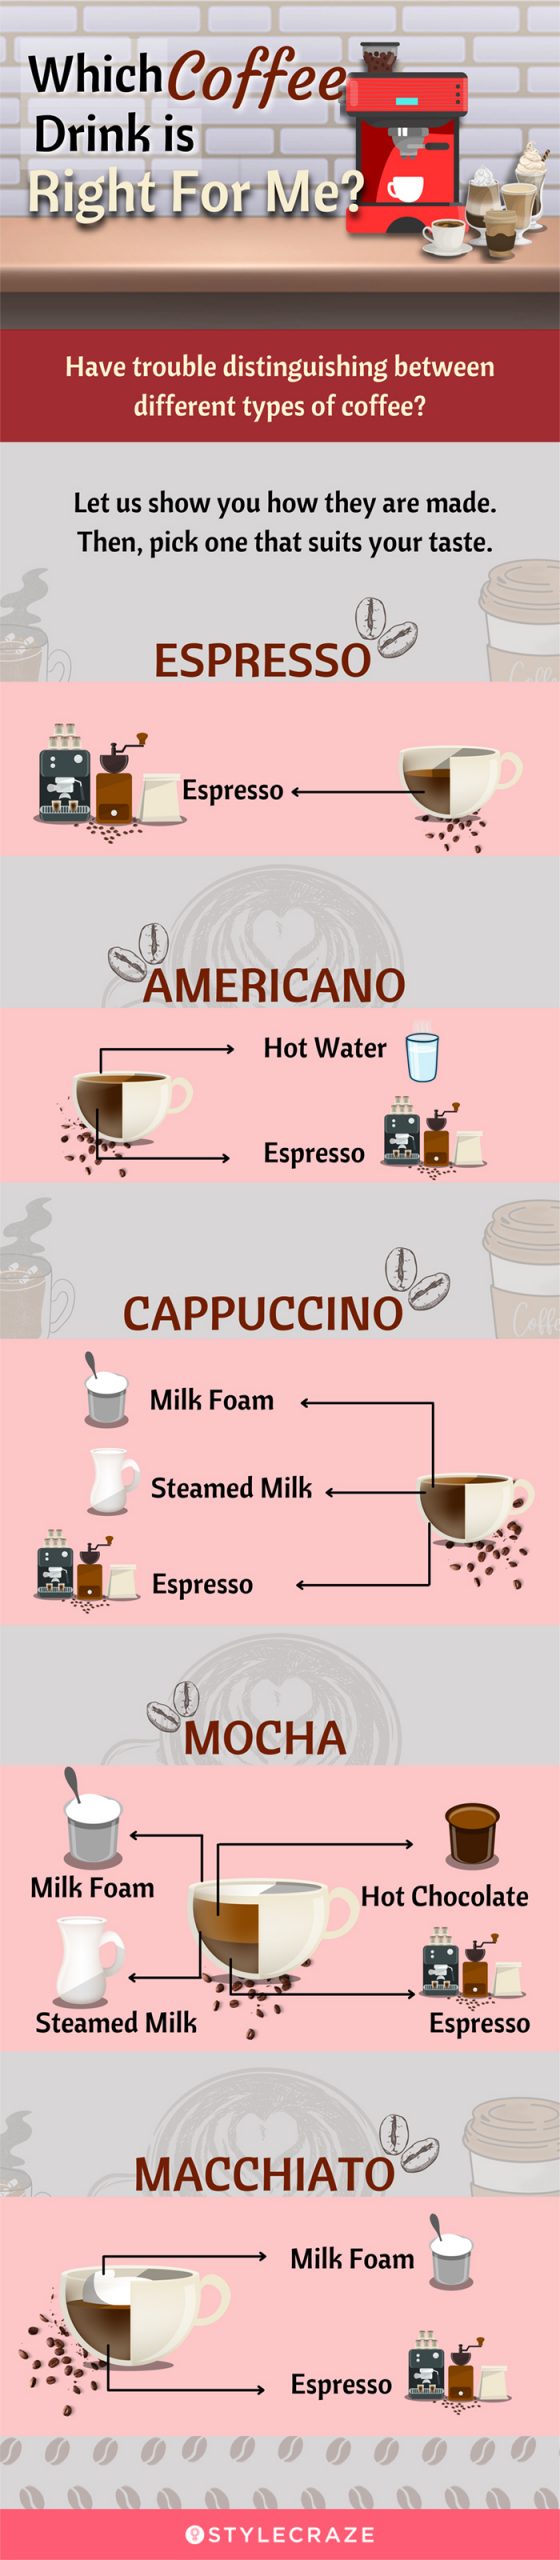 which coffee drink is right for me [infographic]